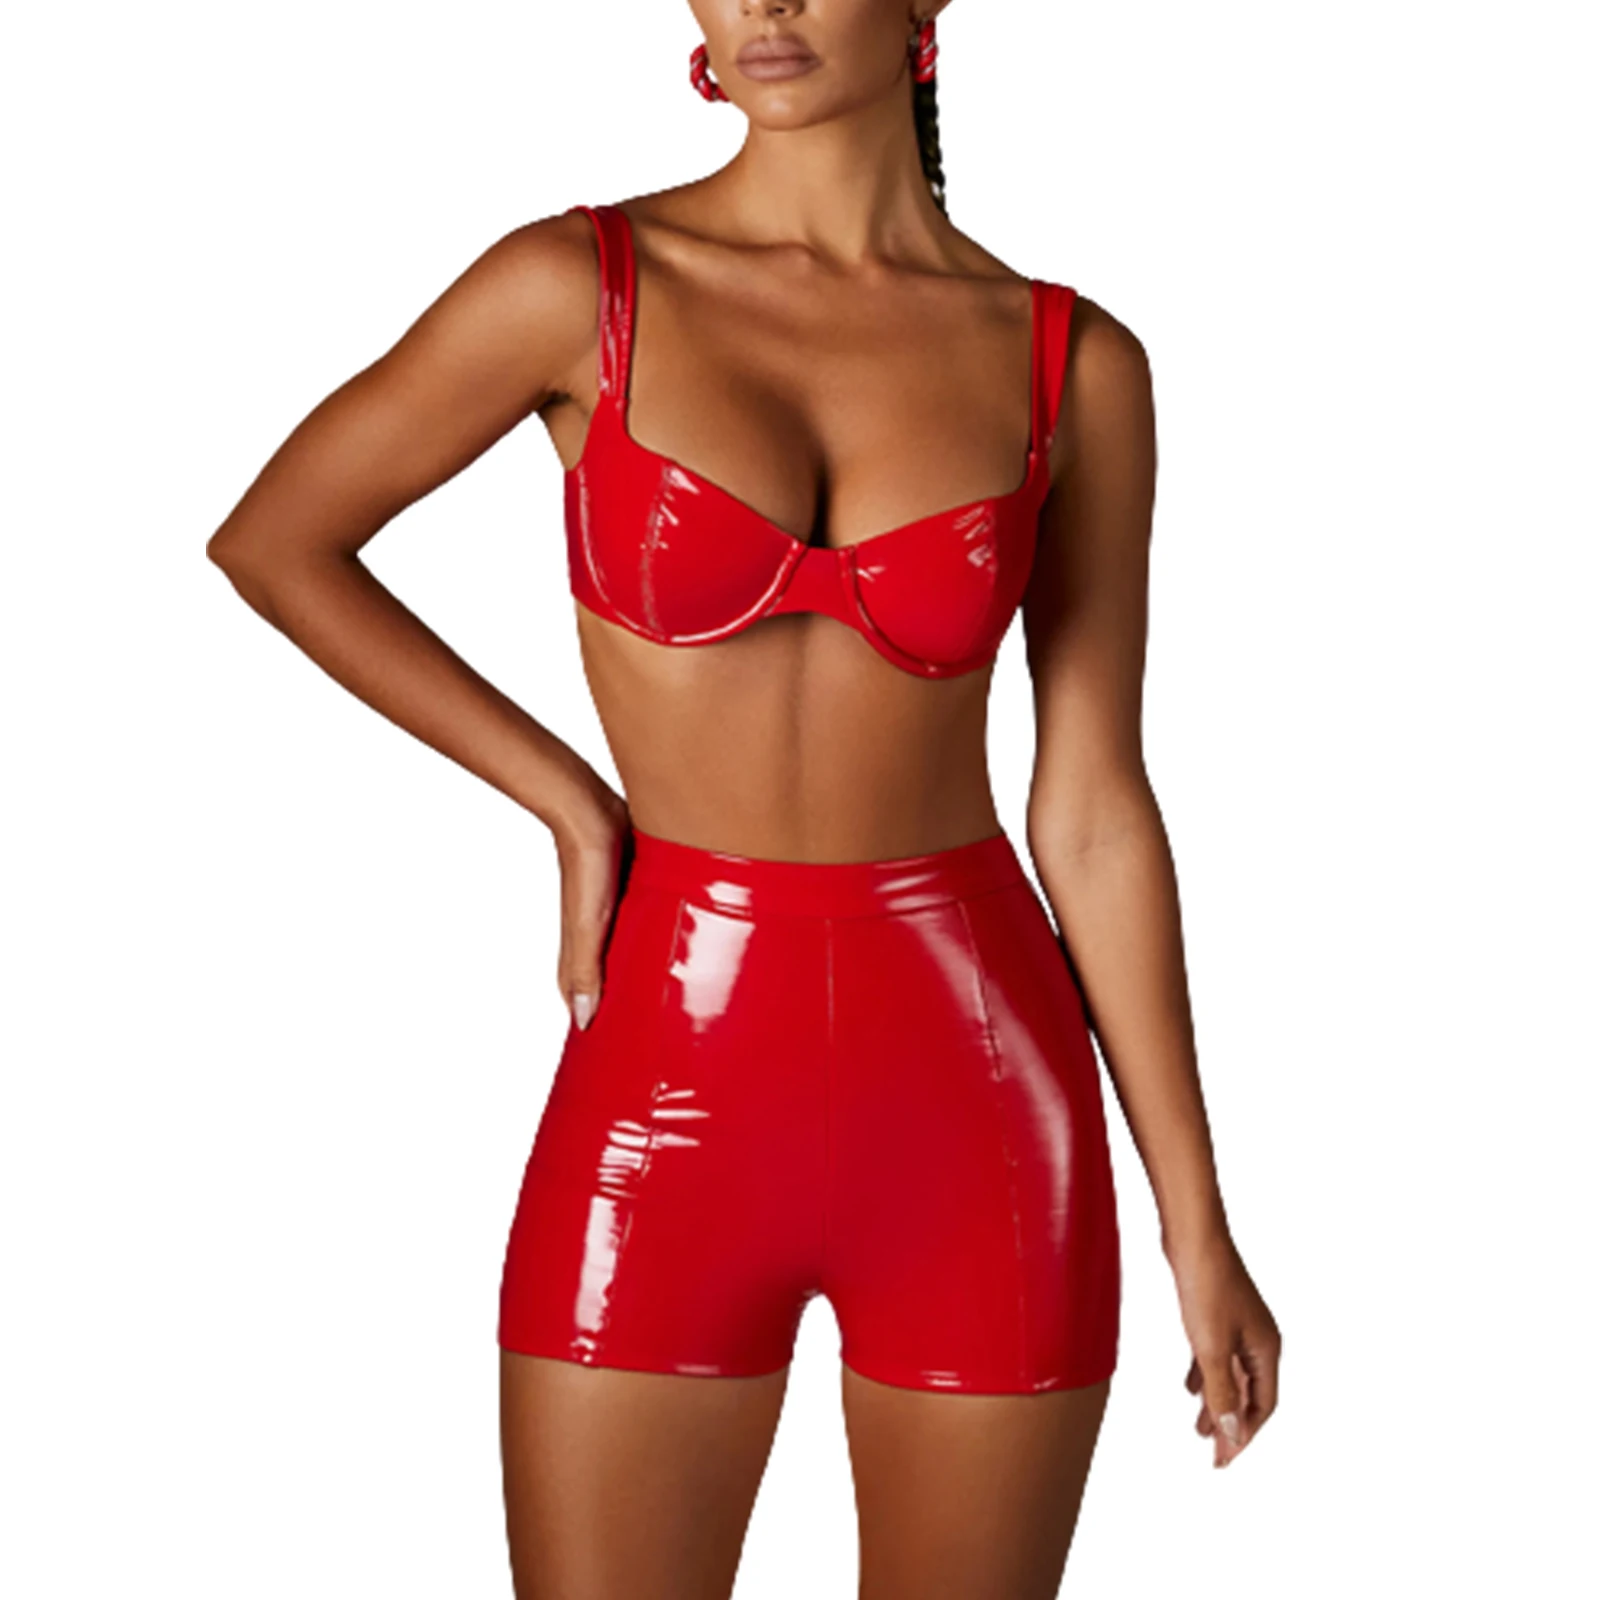 bikini cover up dress hirigin New Women Leather Shorts Set Sexy Lady Push up Bra with Slim Fit Shorts Party Shiny PU Stage Show Costume Shorts Outfit crochet bathing suit cover up